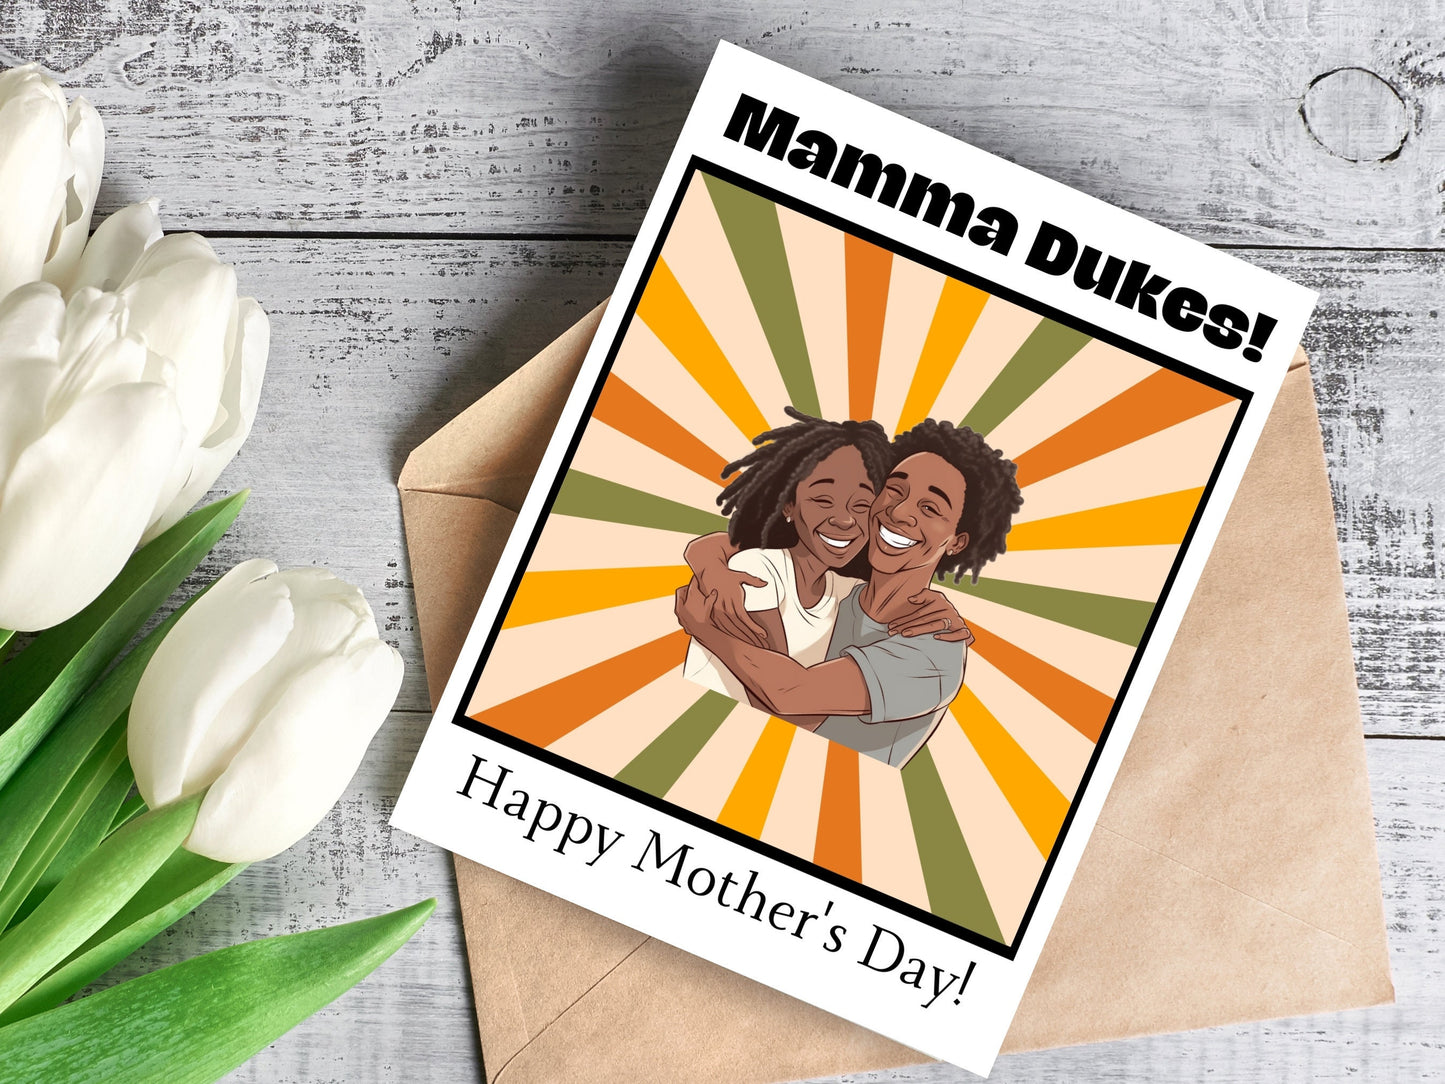 Momma Dukes Mother's Day Card, Black Mother's Day Card From Him, Funny Mother's Day Card, African American Mother's Day Card